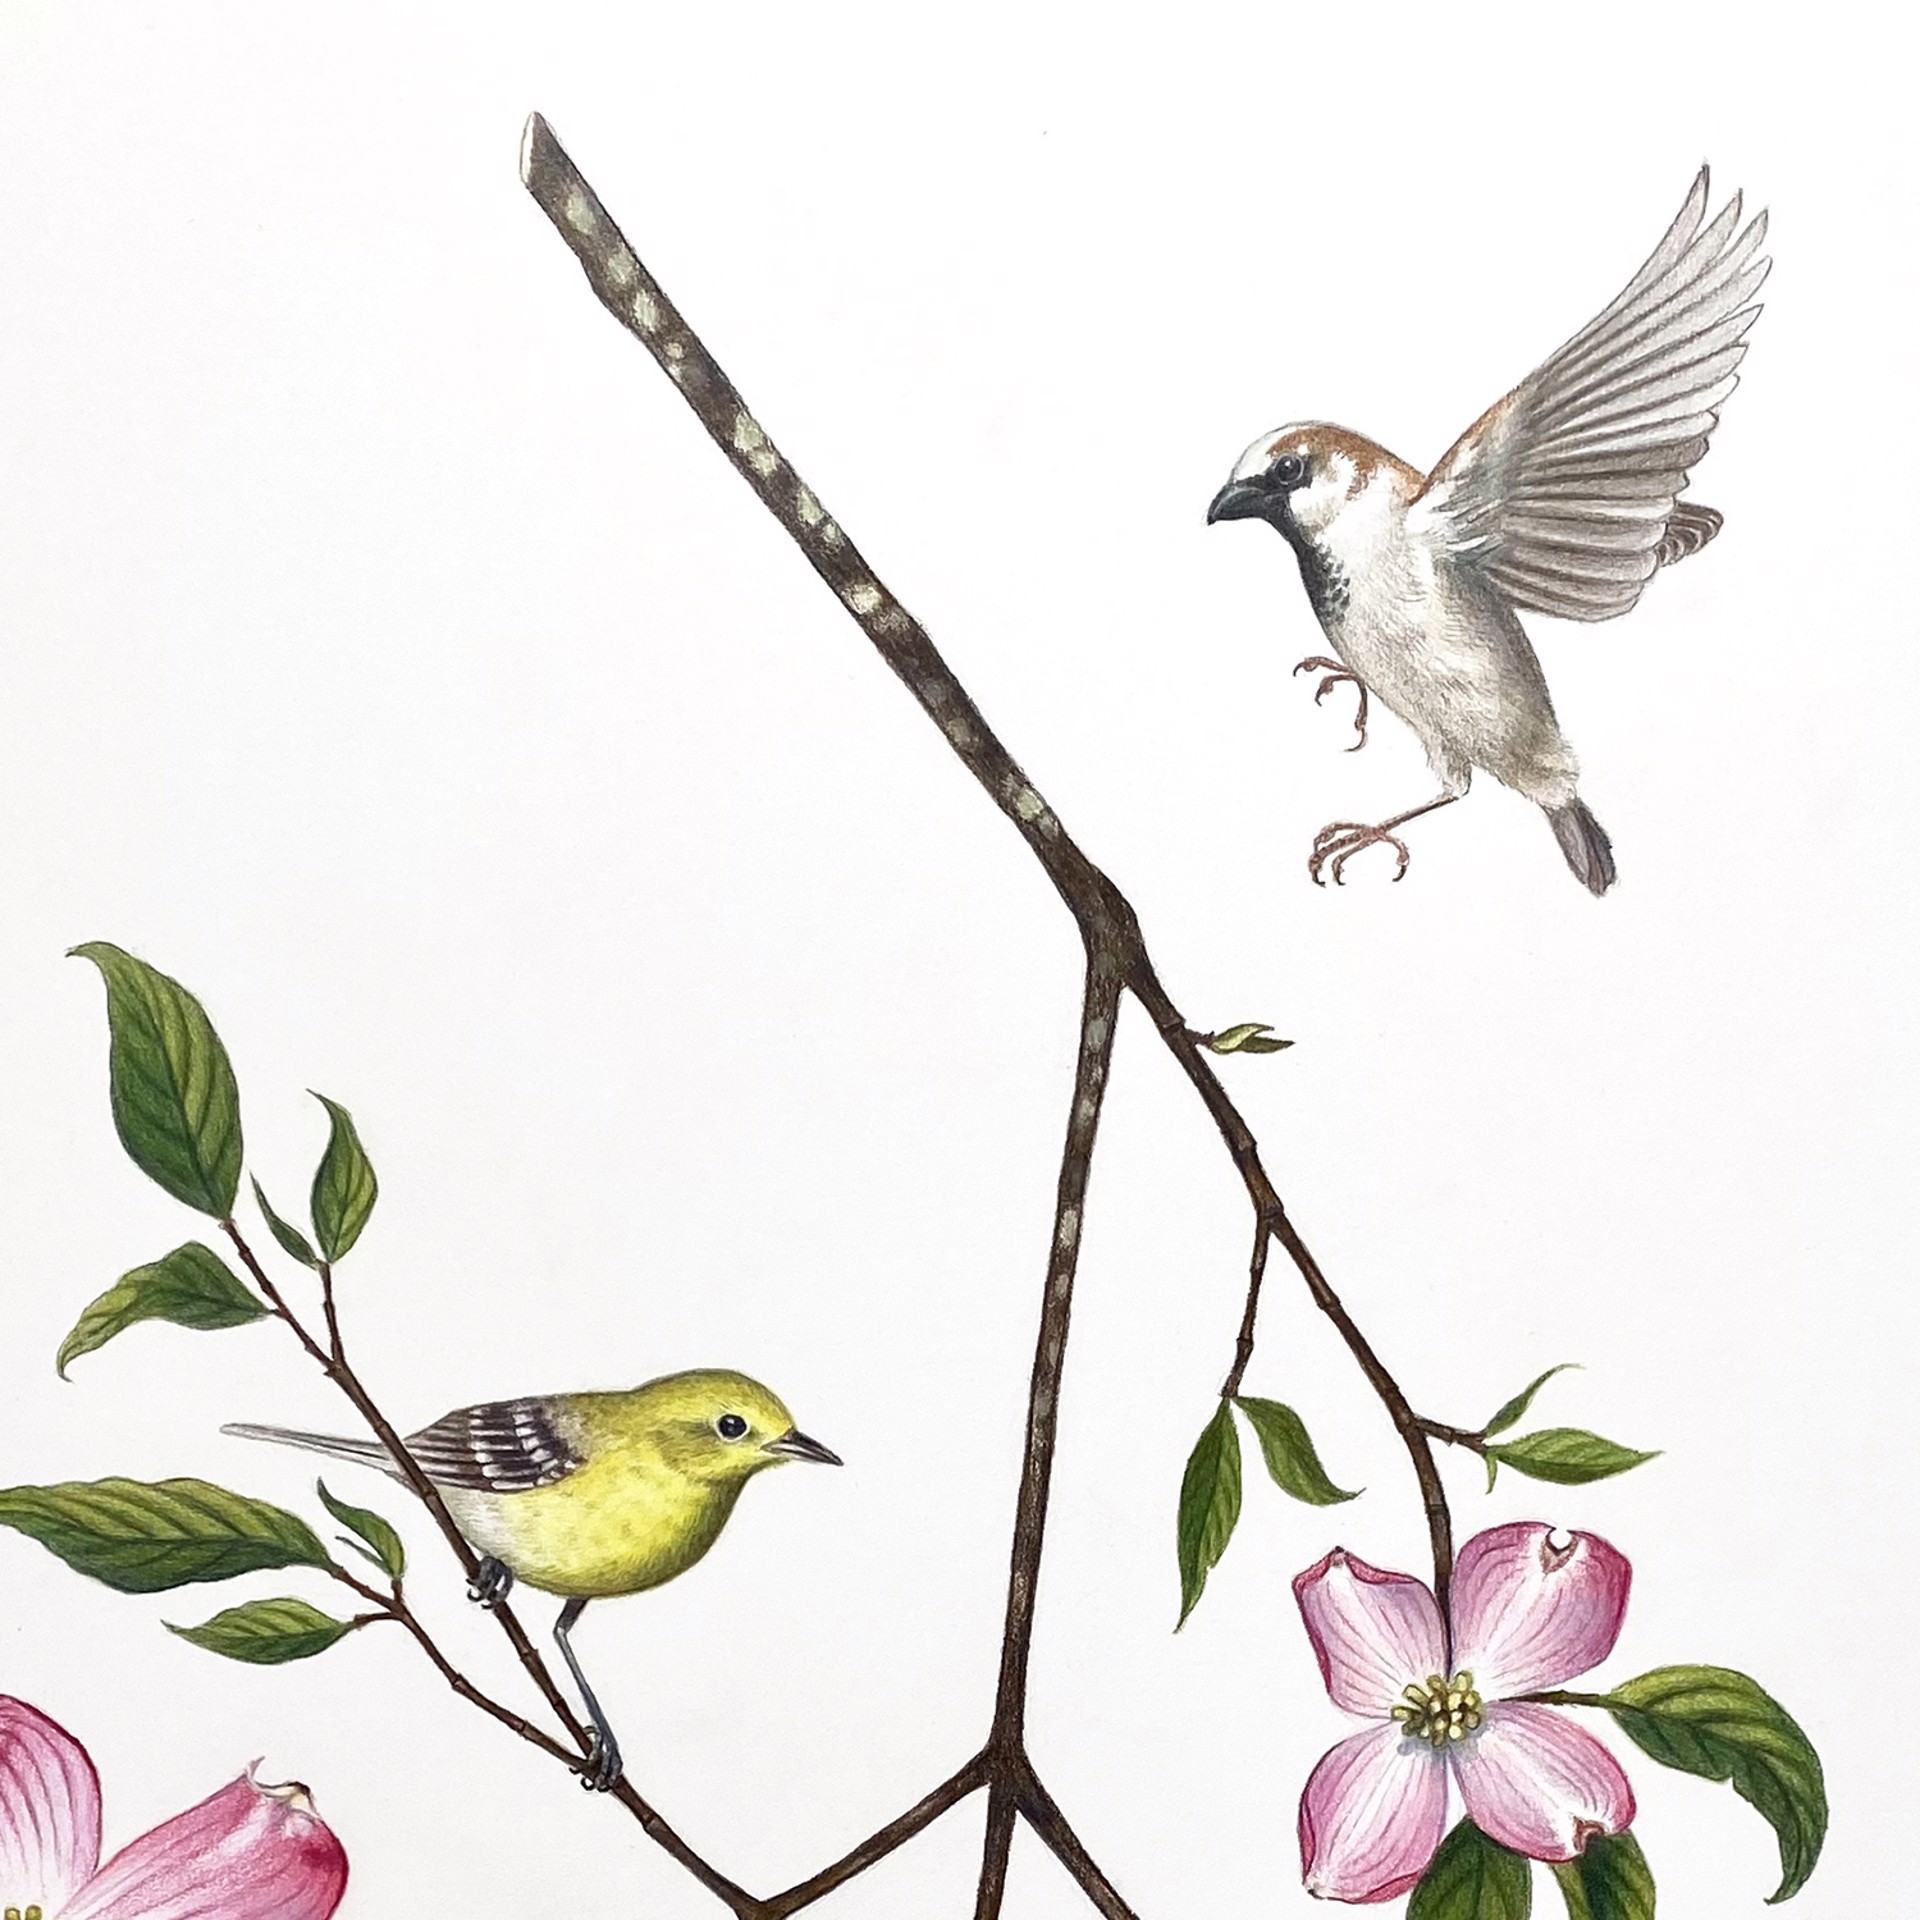 Dogwood Branch with Warblers, Sparrow & Cabbage White by Hannah Hanlon